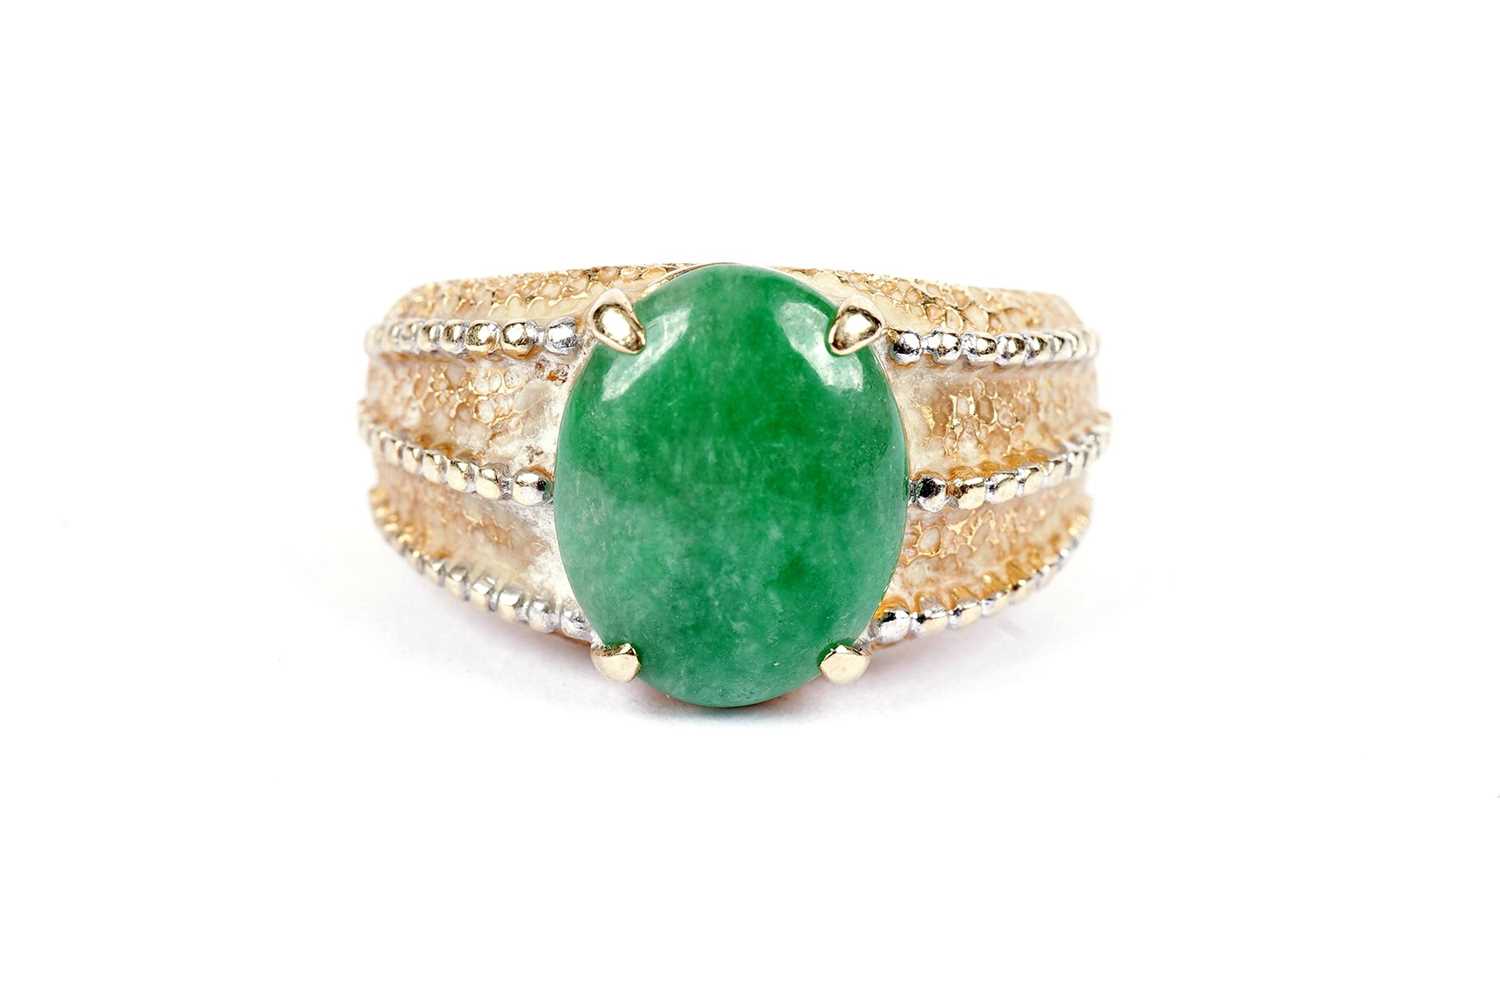 An aventurine quartz and yellow gold dress ring - Image 2 of 4